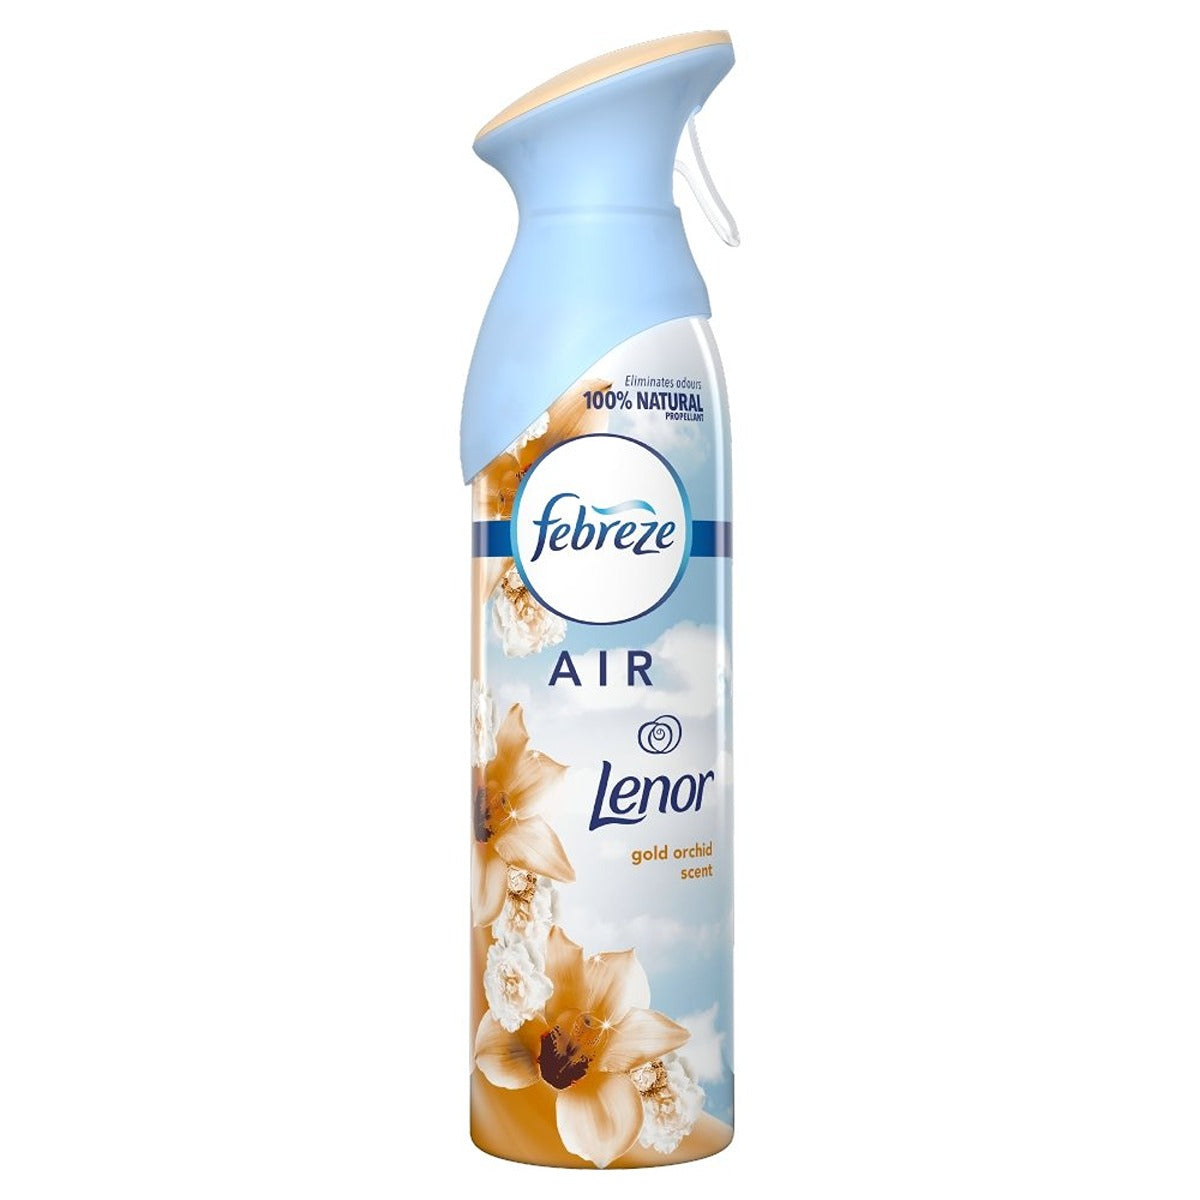 Febreze - Lenor Gold Orchid Scent Air Freshener - 300ml - Continental Food Store